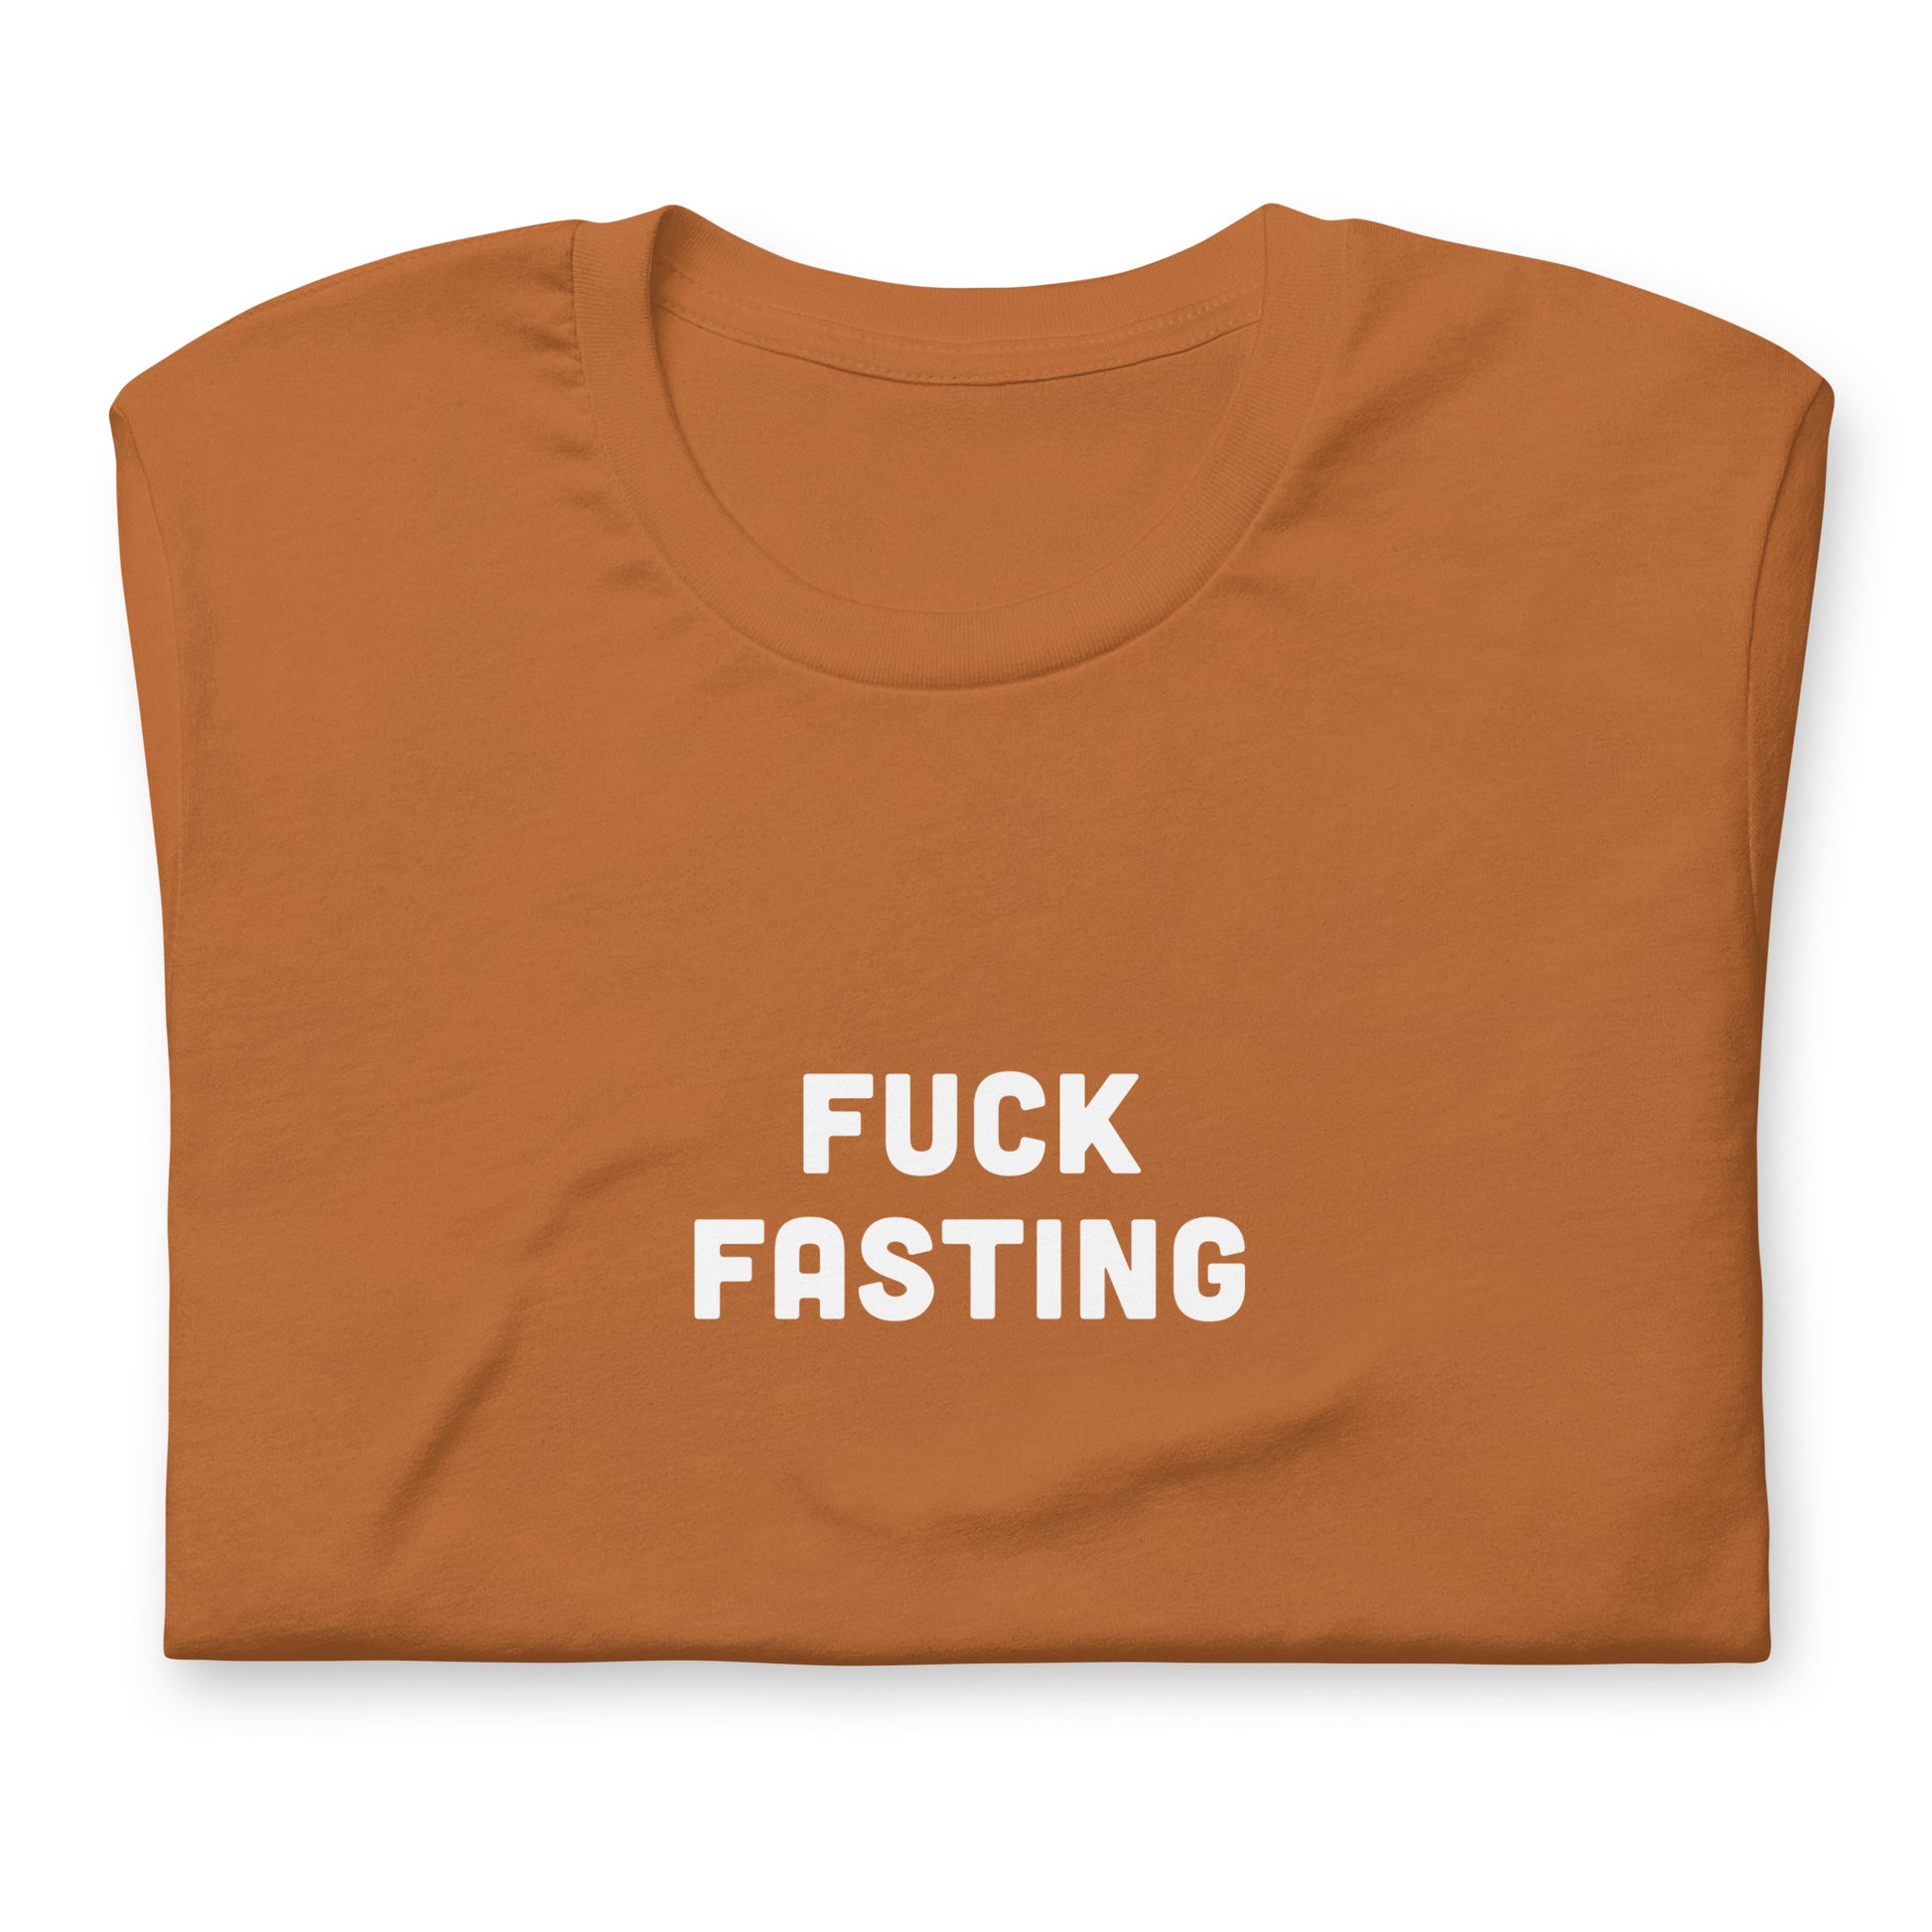 Fuck Fasting T-Shirt Size XL Color Navy